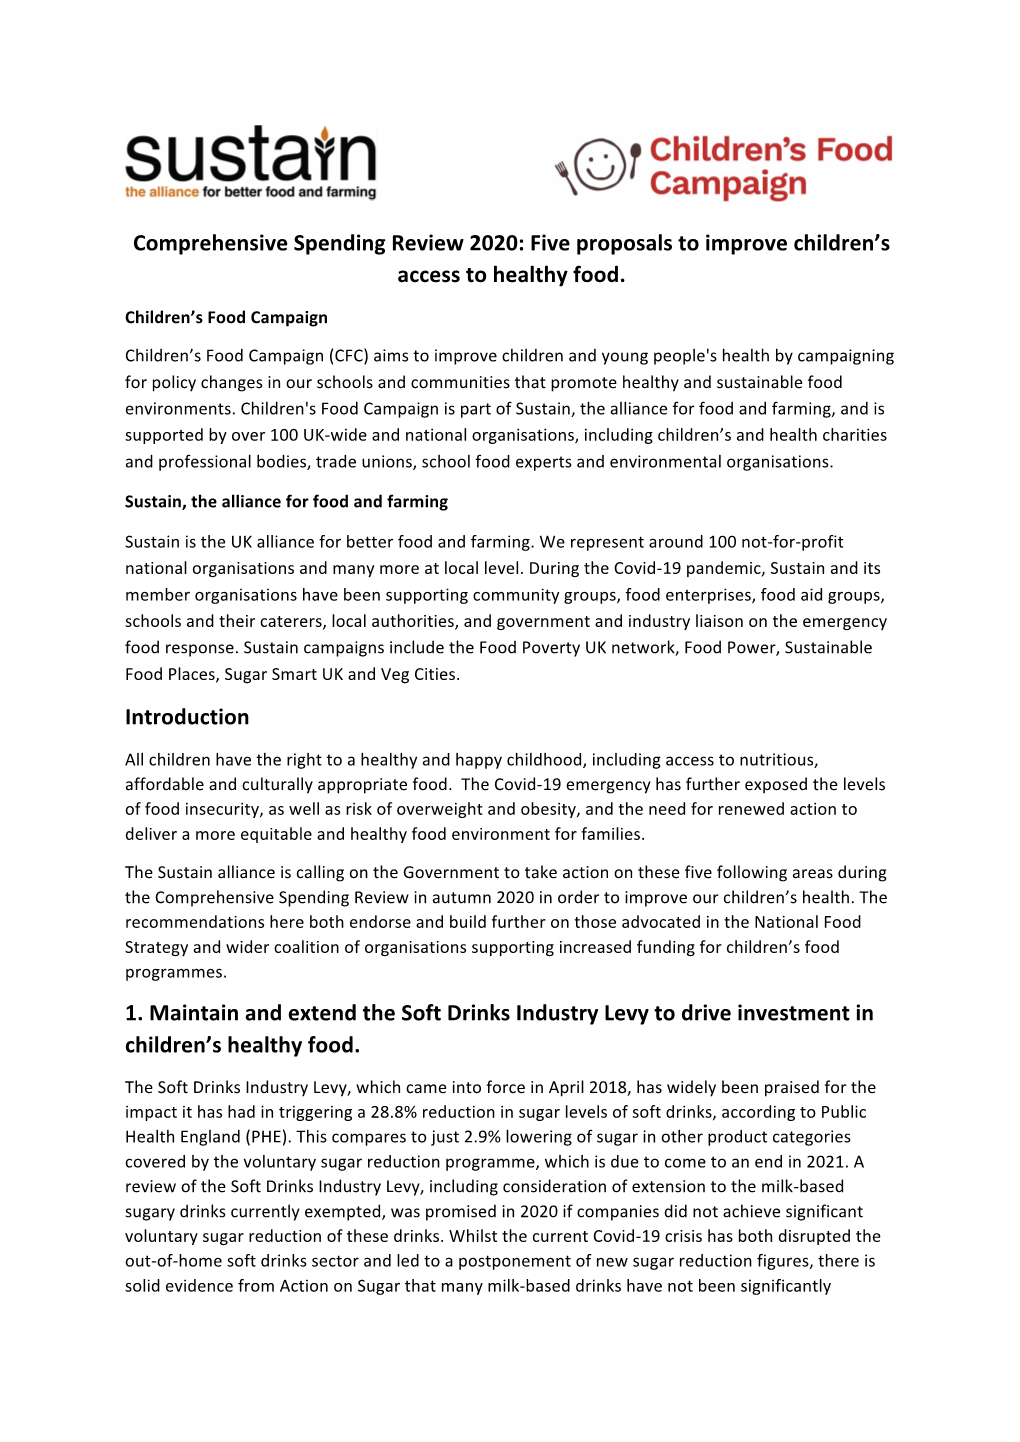 Our Submission Into the HM Treasury Comprehensive Spending Review